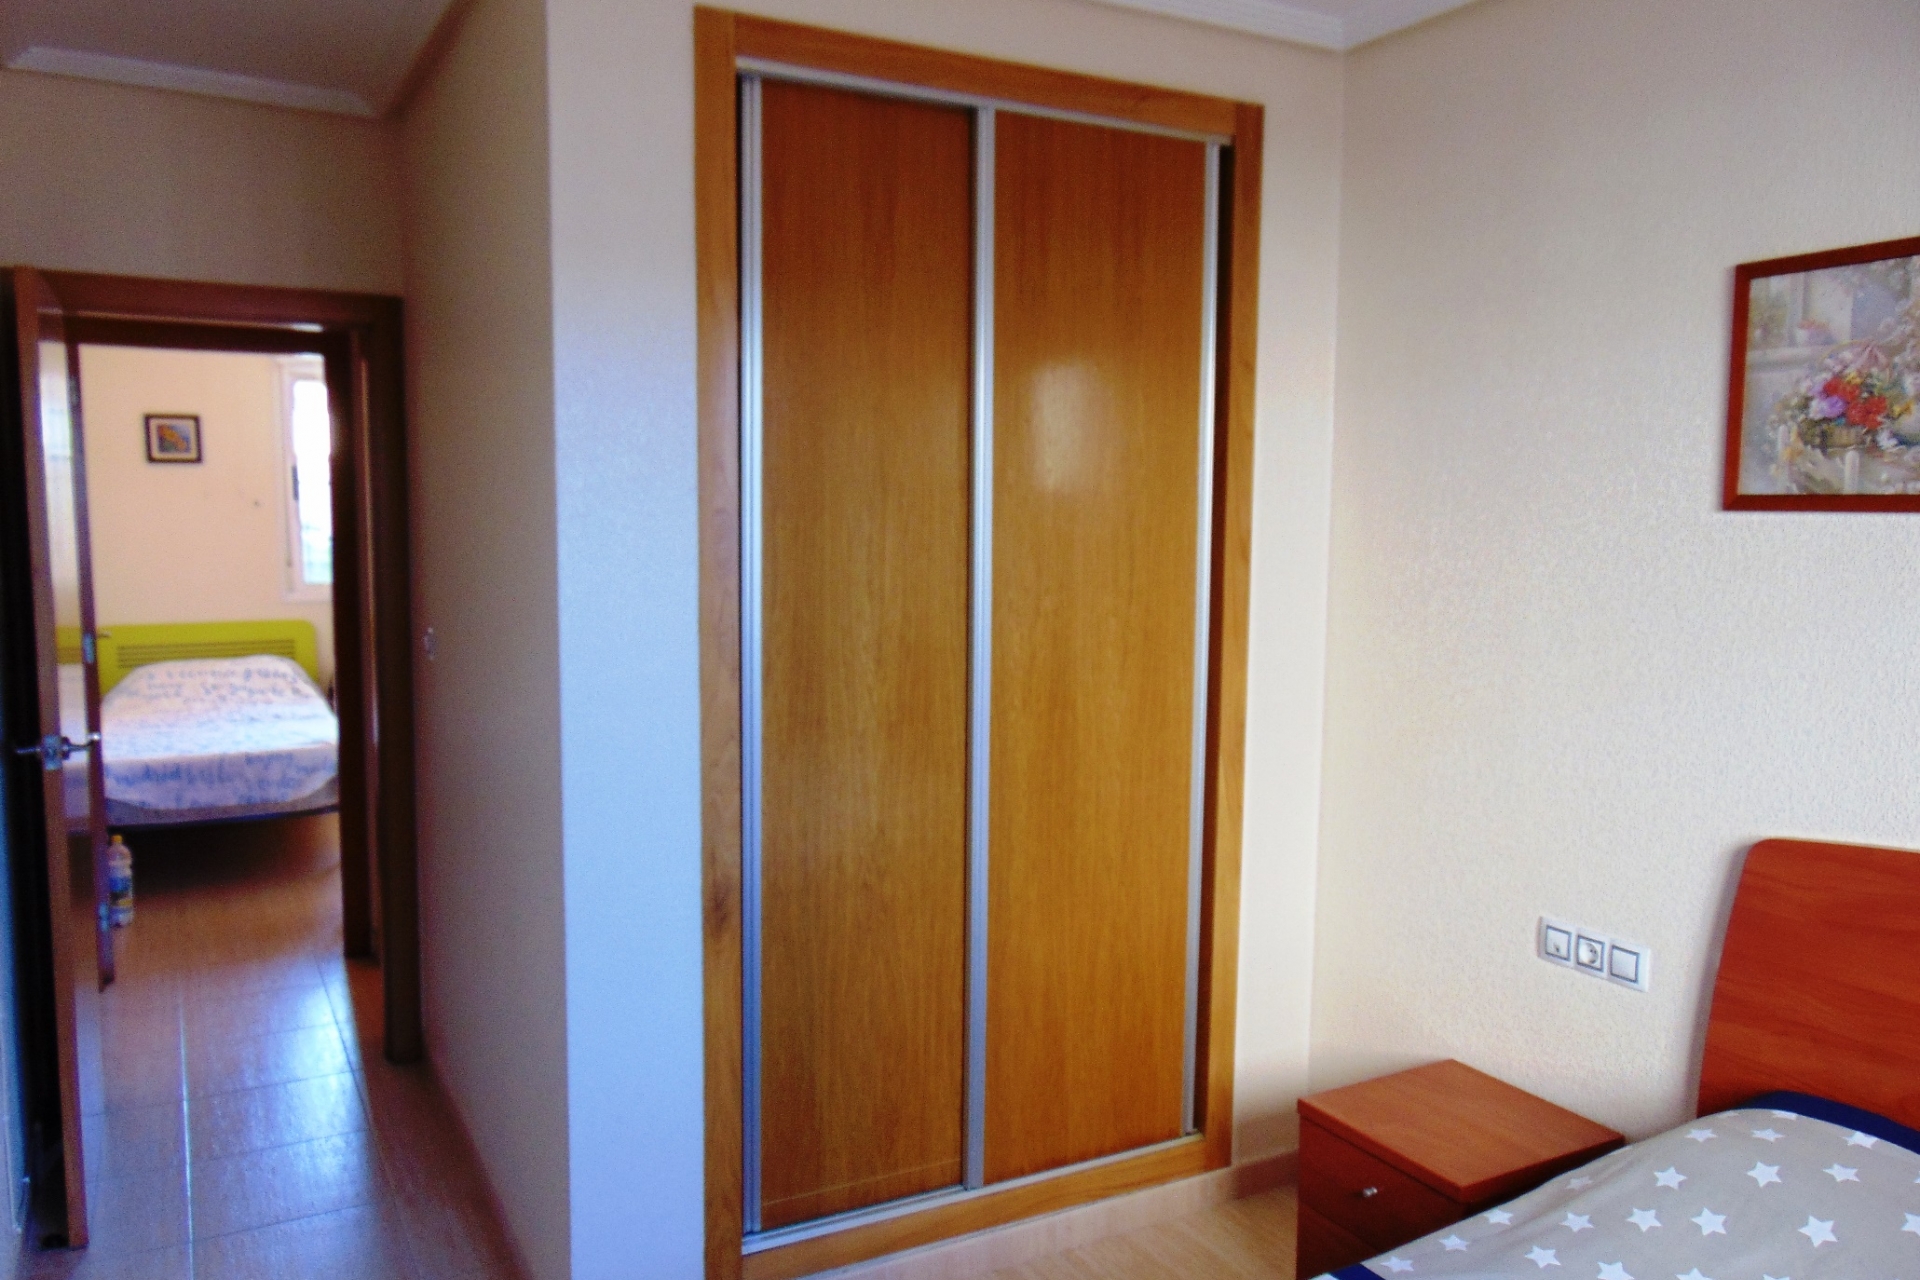 Archived - Apartment for sale - Torrevieja - Aguas Nuevas